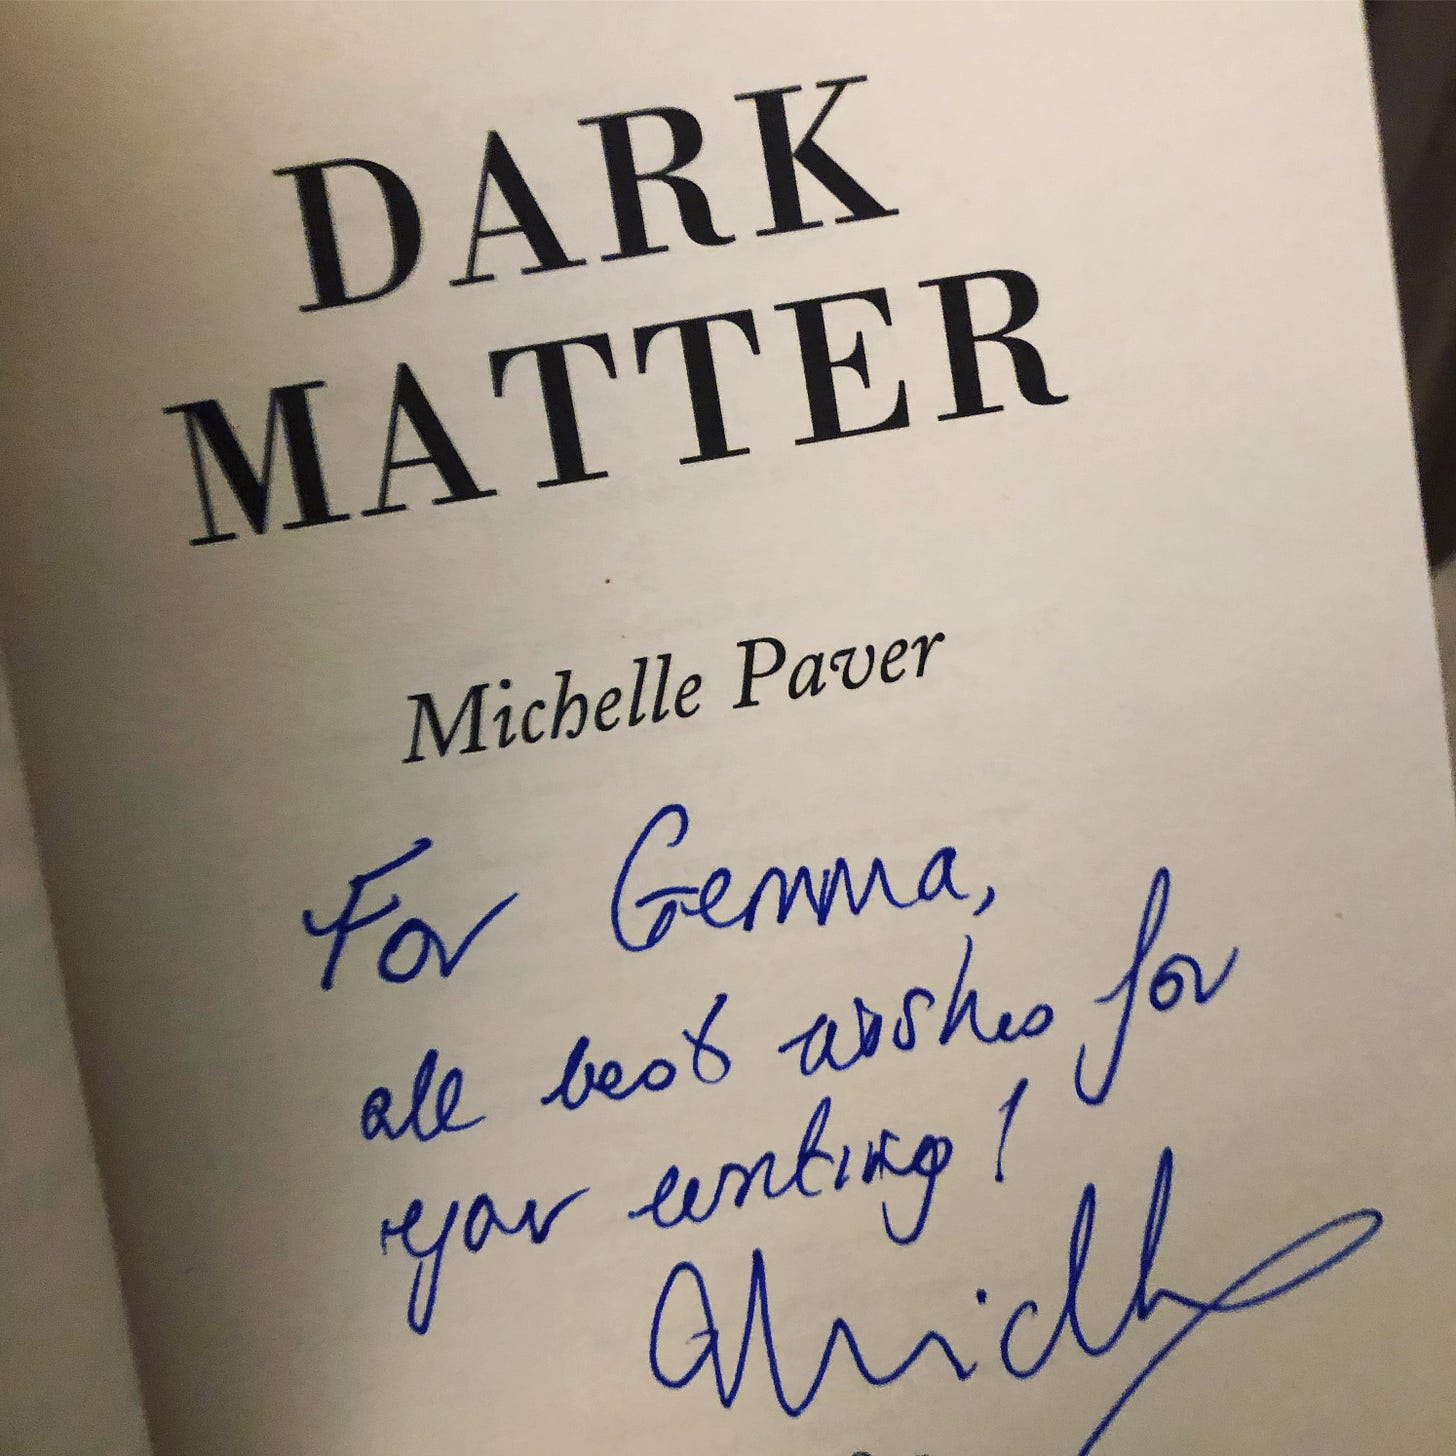 Title page of Michelle Paver's Dark Matter, in which the author has written 'For Gemma, all best wishes for your writing!'